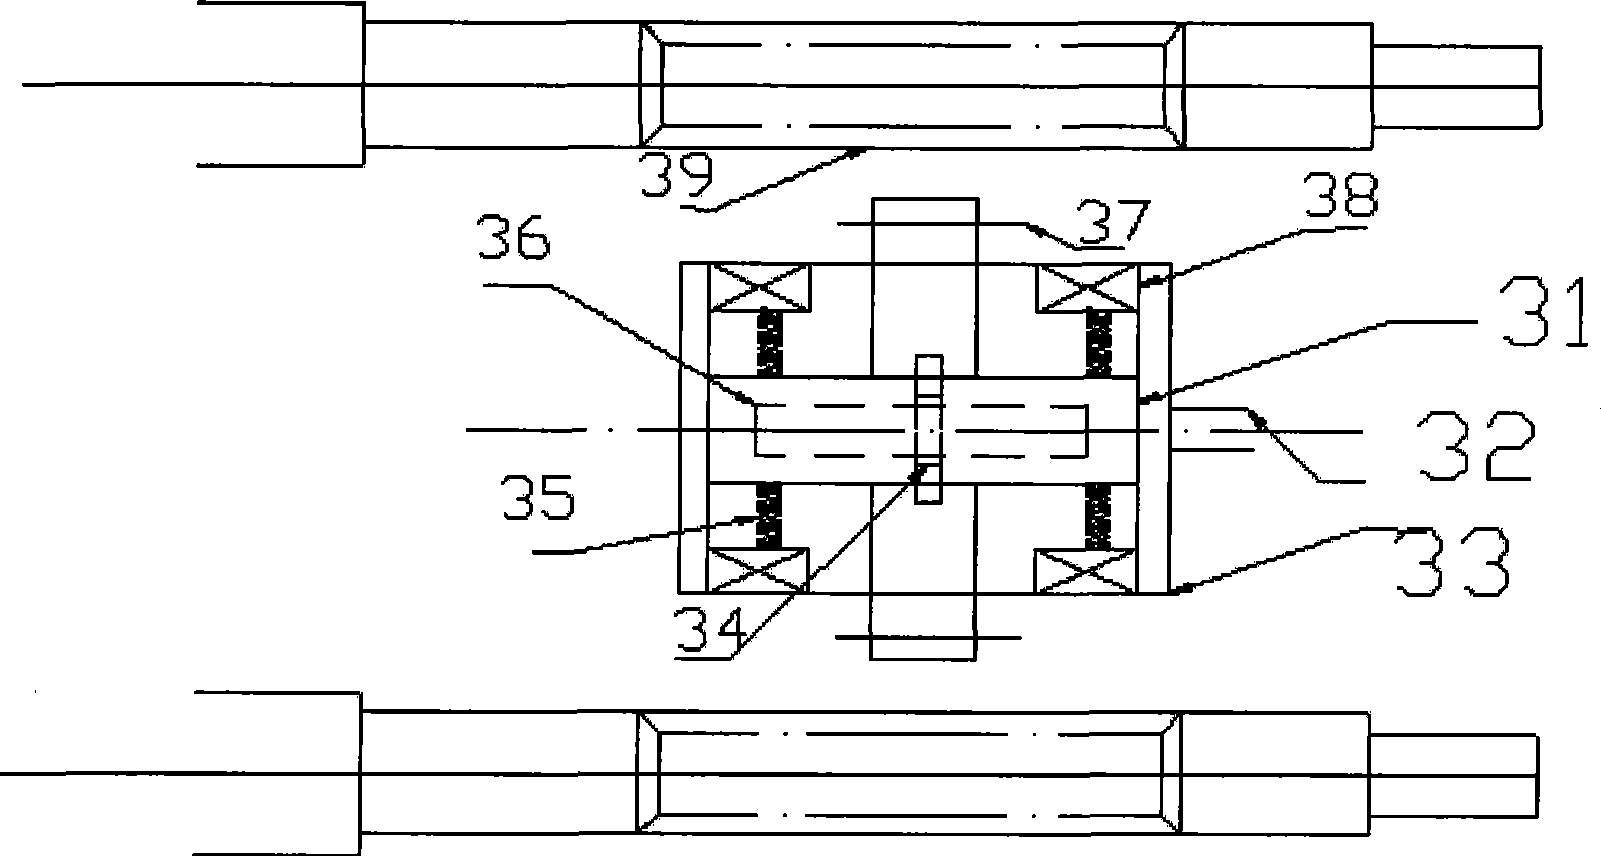 Actuating mechanism of vibration damping device with force and amplitude adjustable based on double slider mechanism